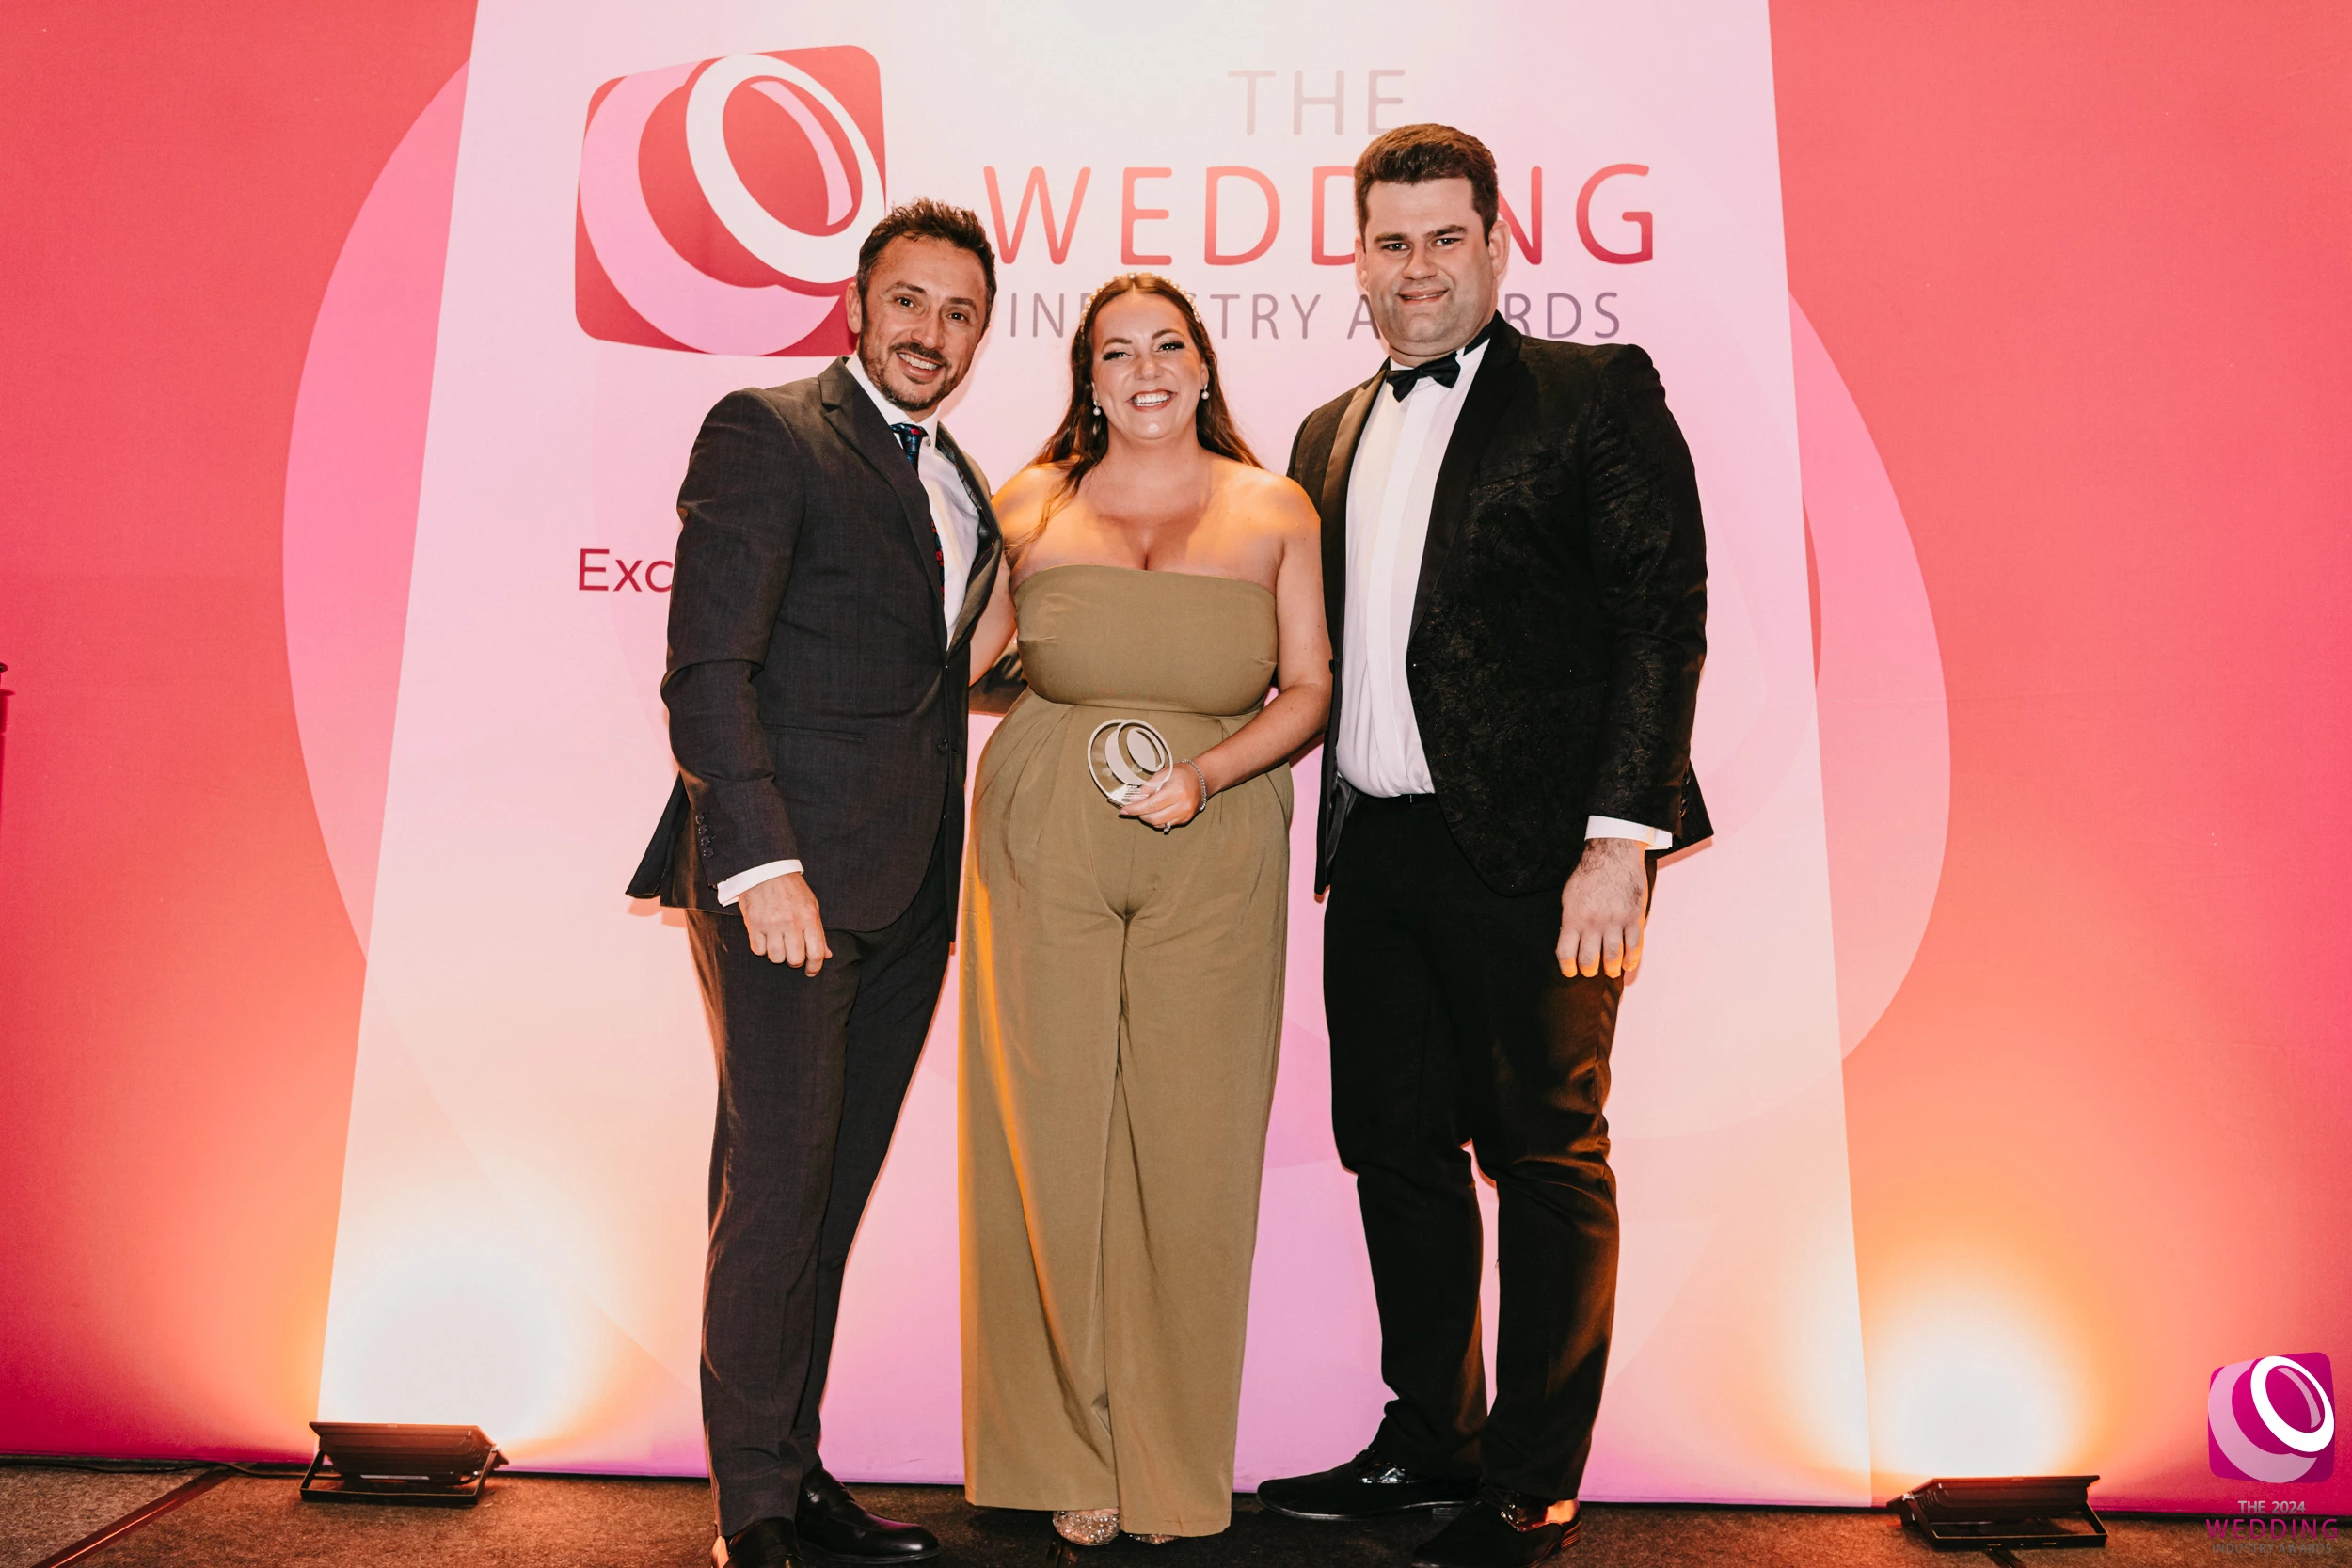 Wedding and events manager Staci Williams with deputy manager Dan Brennan (right) and TWIA Founder and Chairman of the Judging Panel Damian Bailey (left)